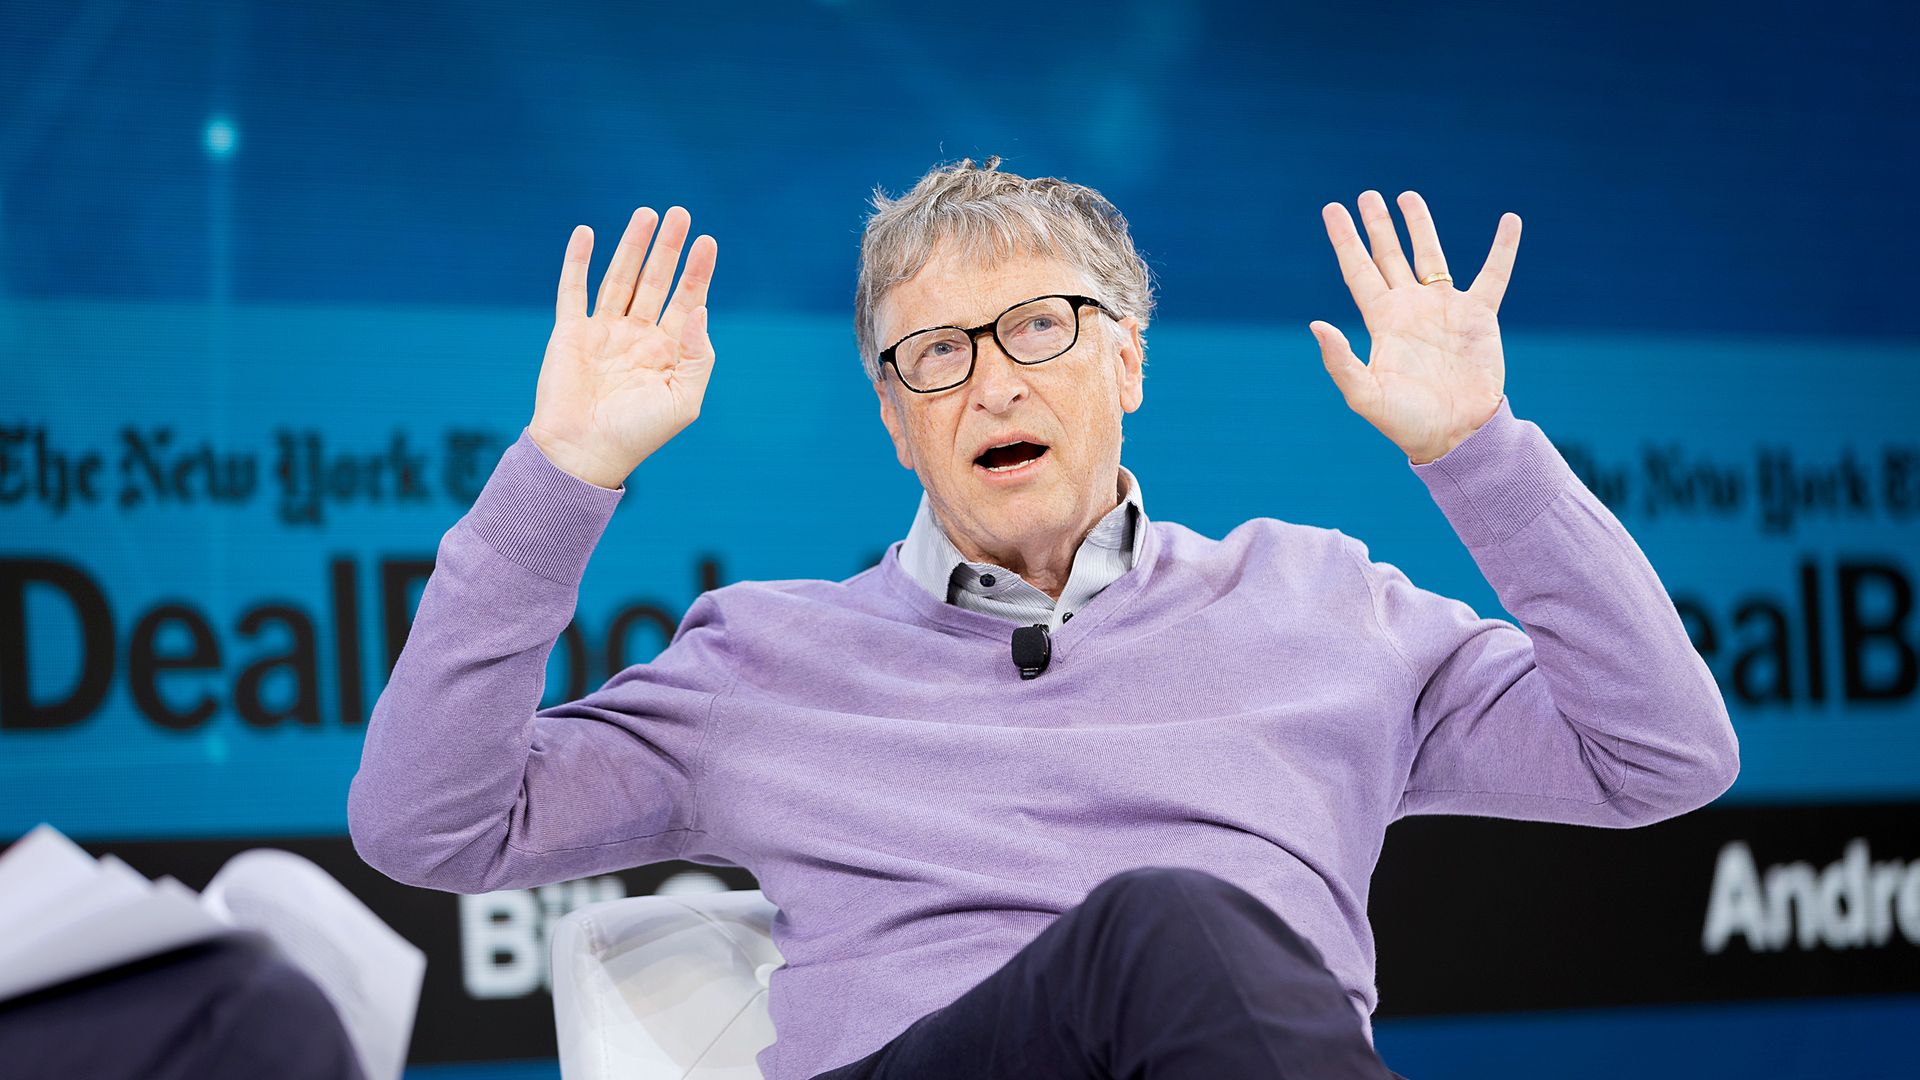 Bill Gates Tops Jeff Bezos As Richest Person In The World